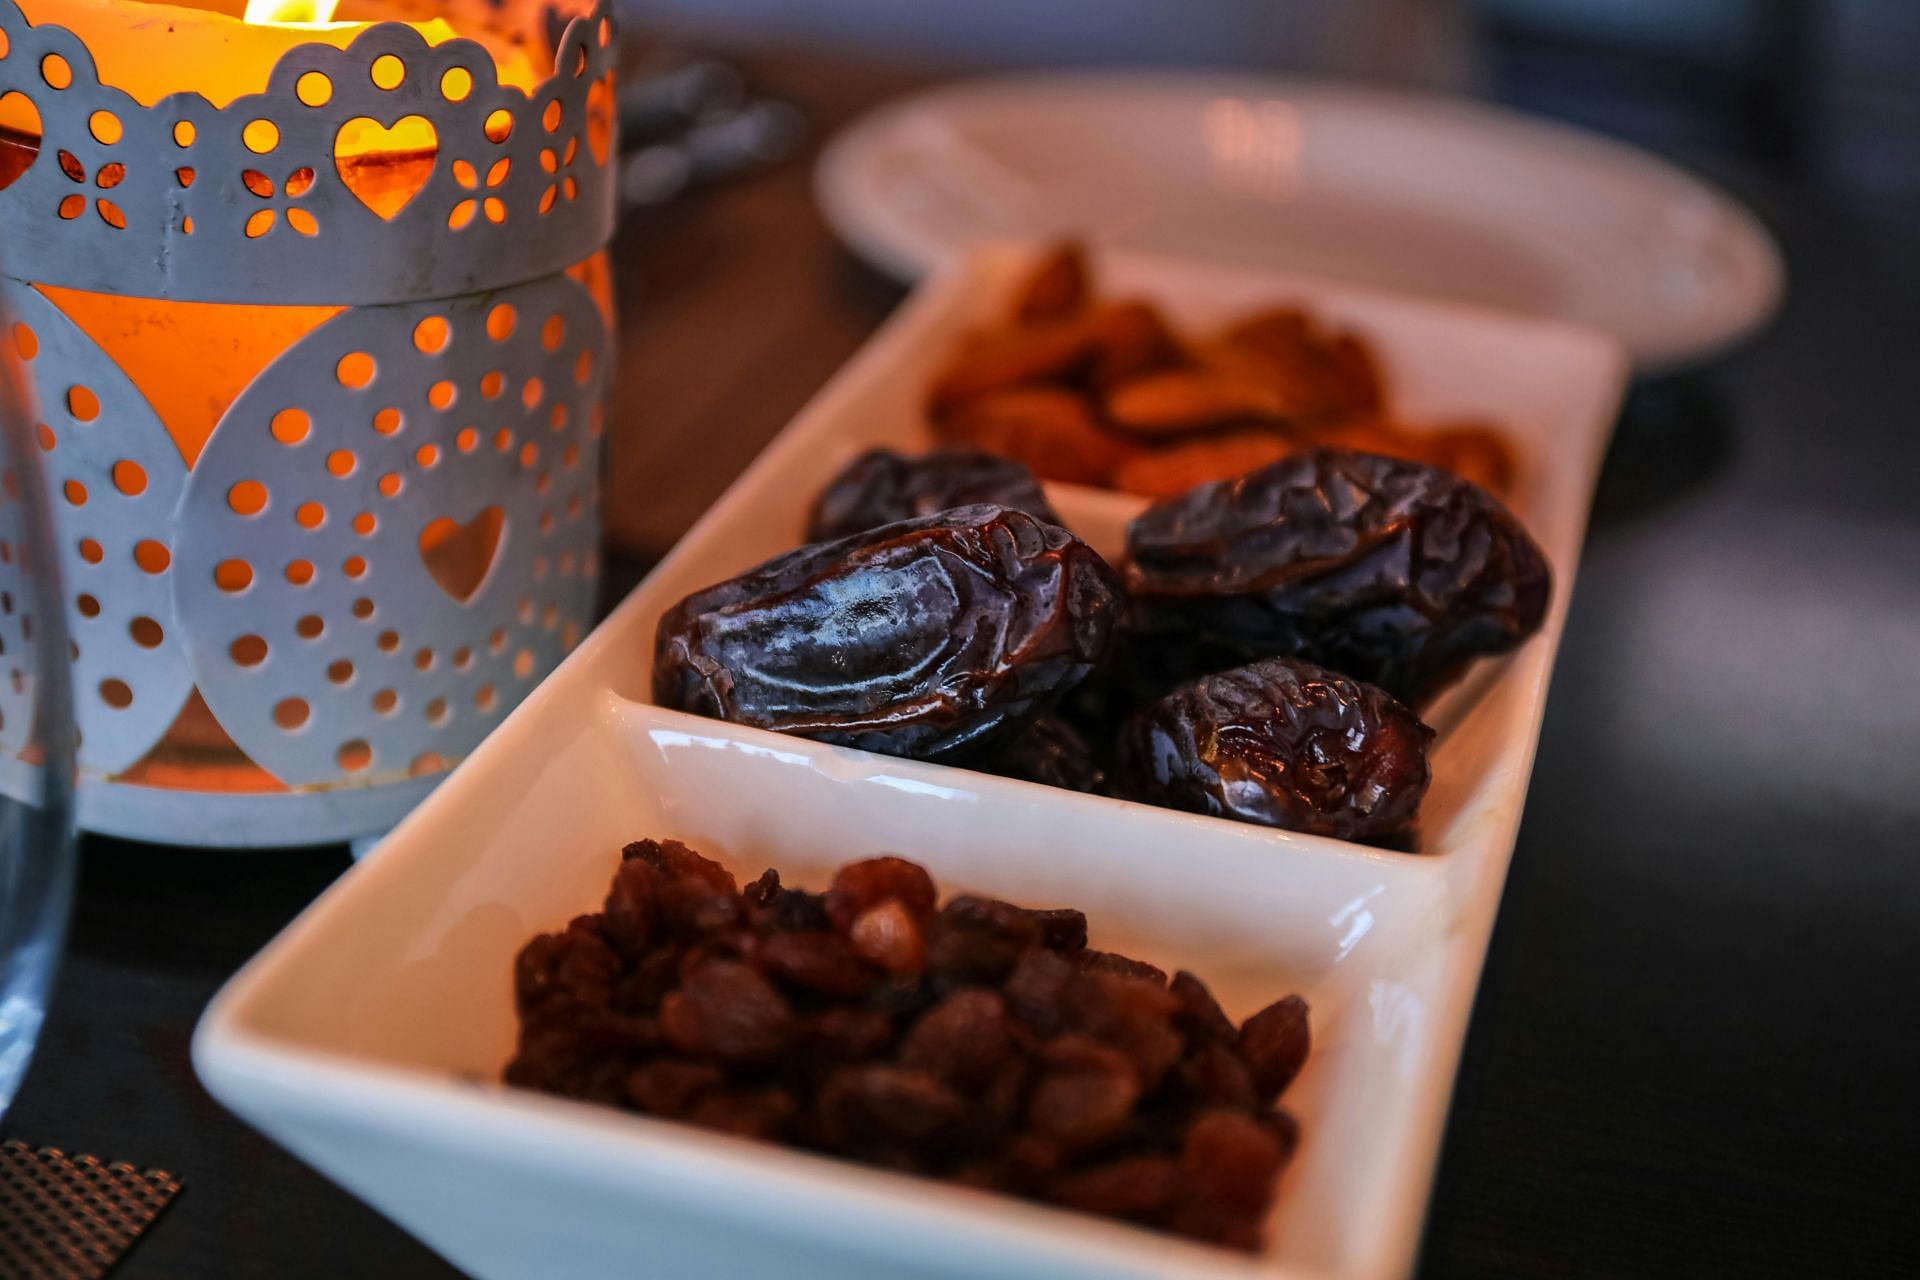 Benefits of fasting in ramadan (image sourced via Pexels / Photo by zak)